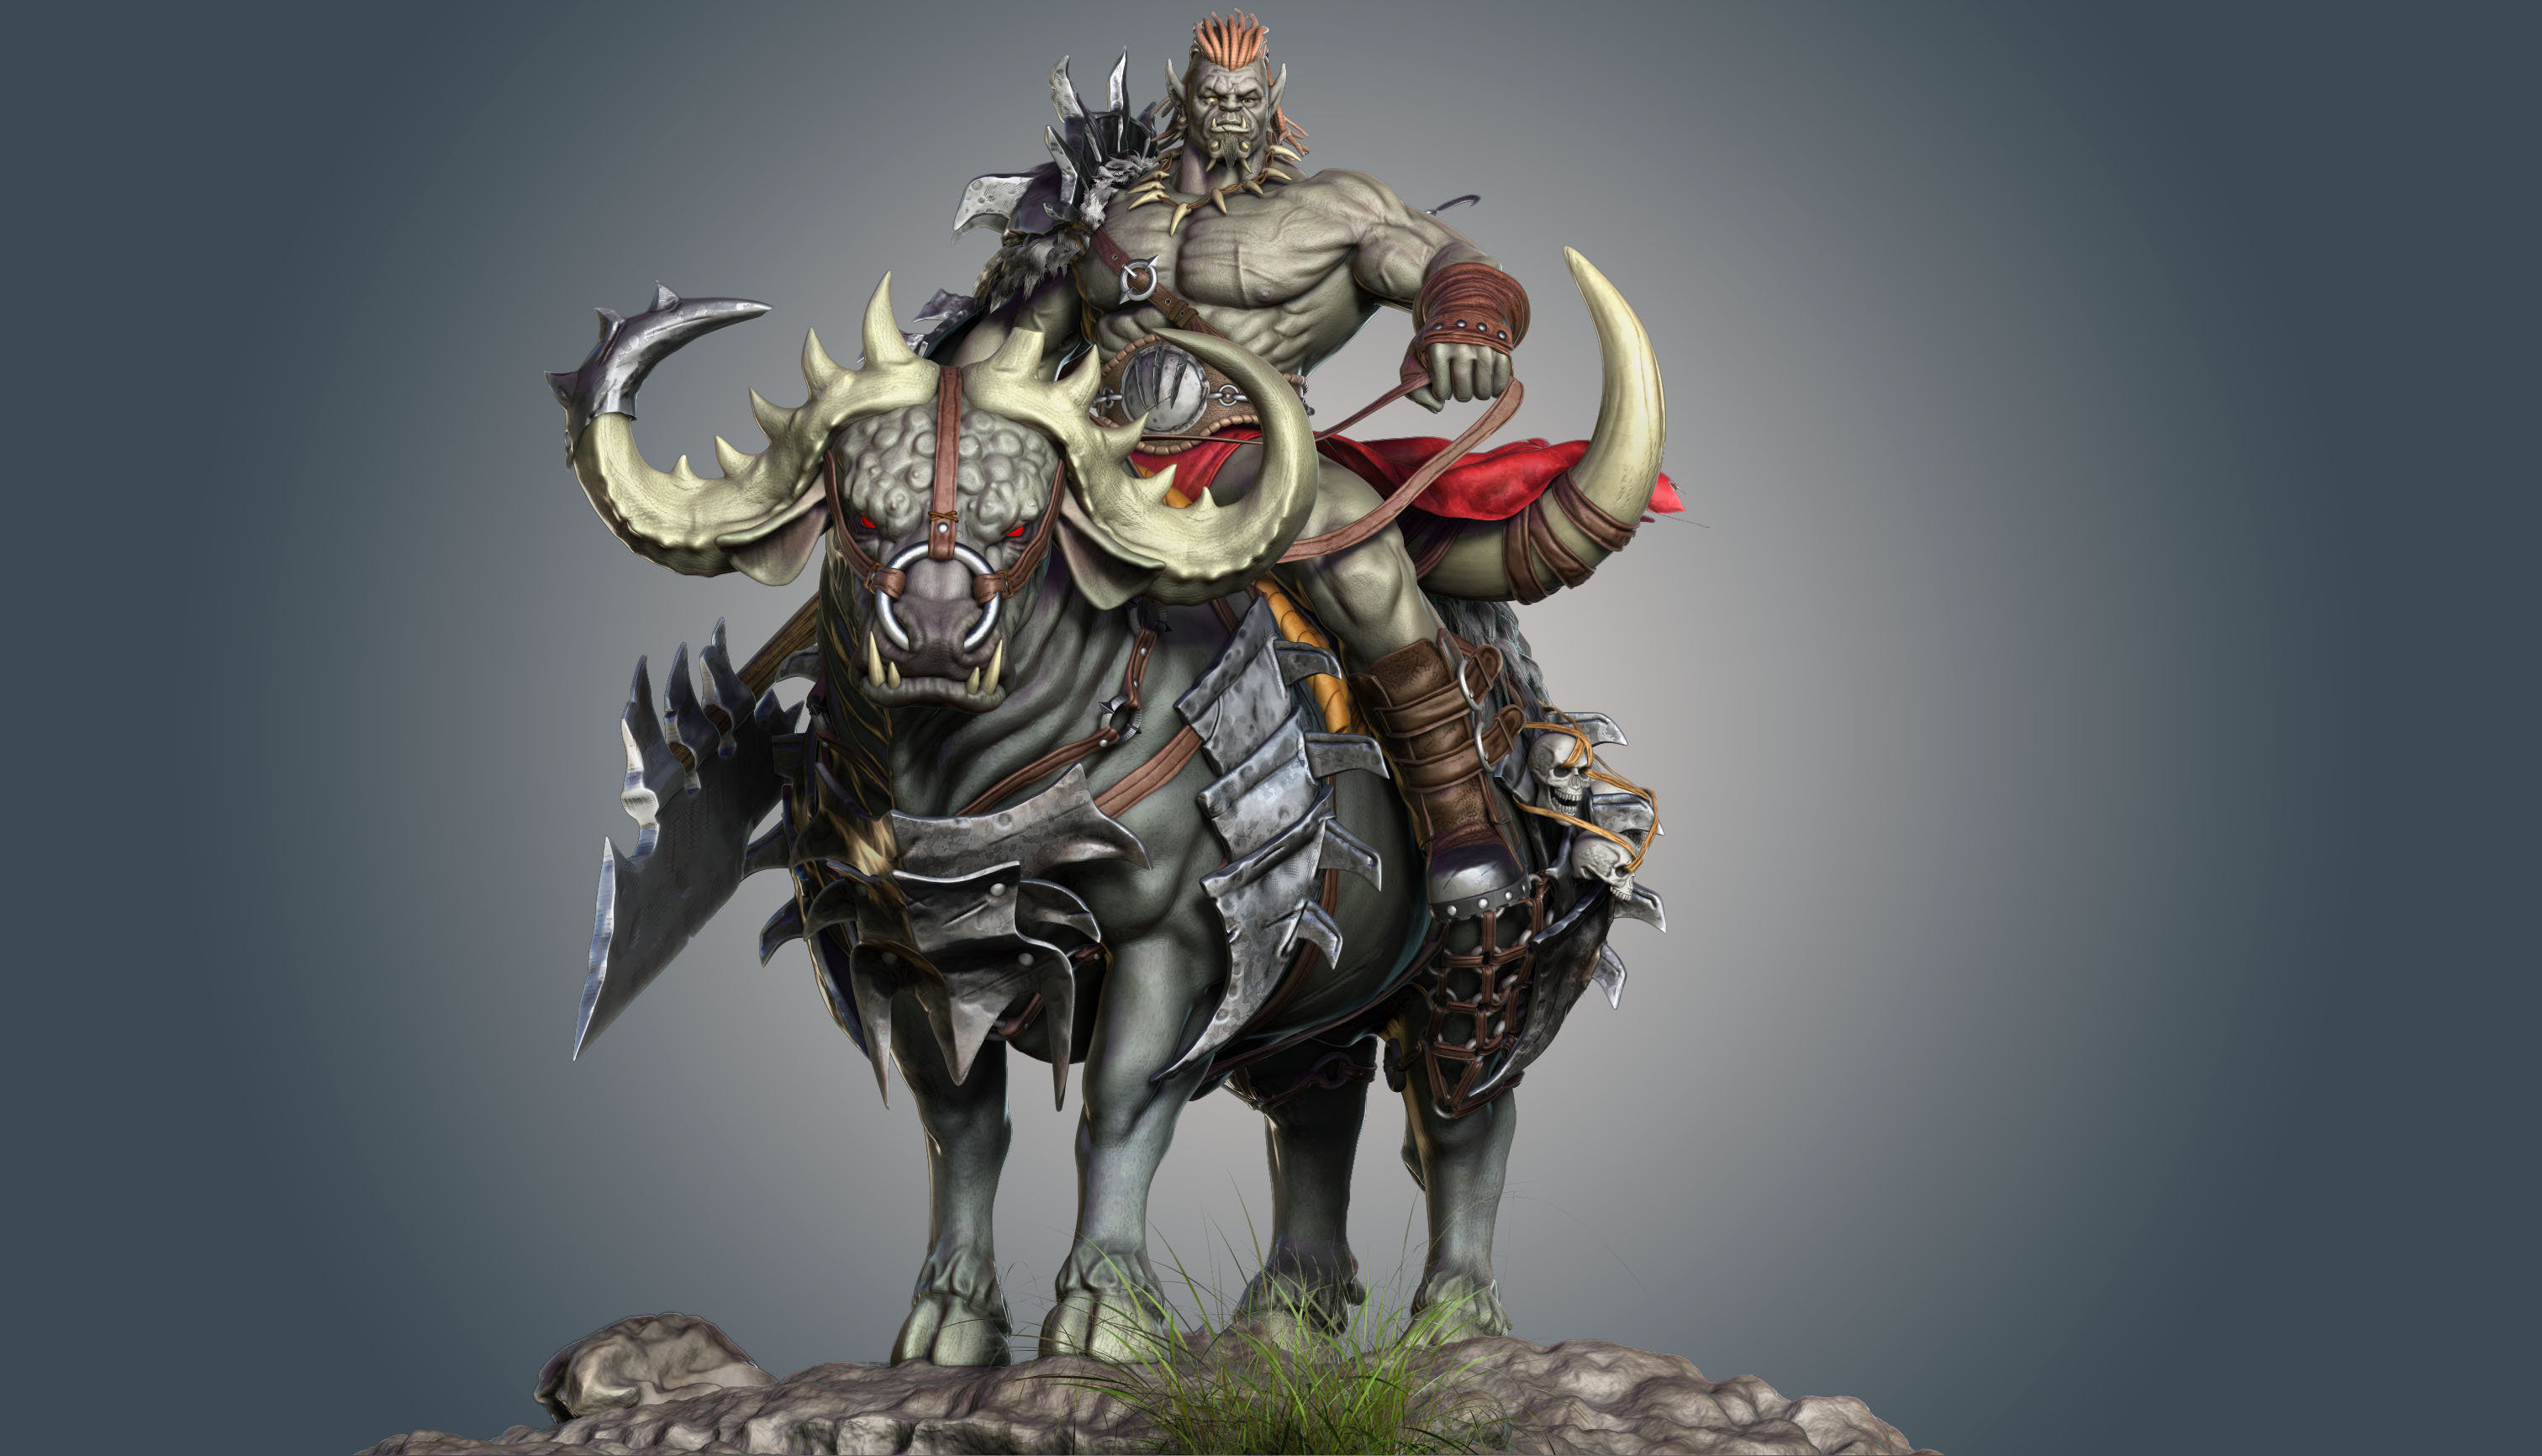 Udemy Orc Rider and Bull Creature Creation in Zbrush